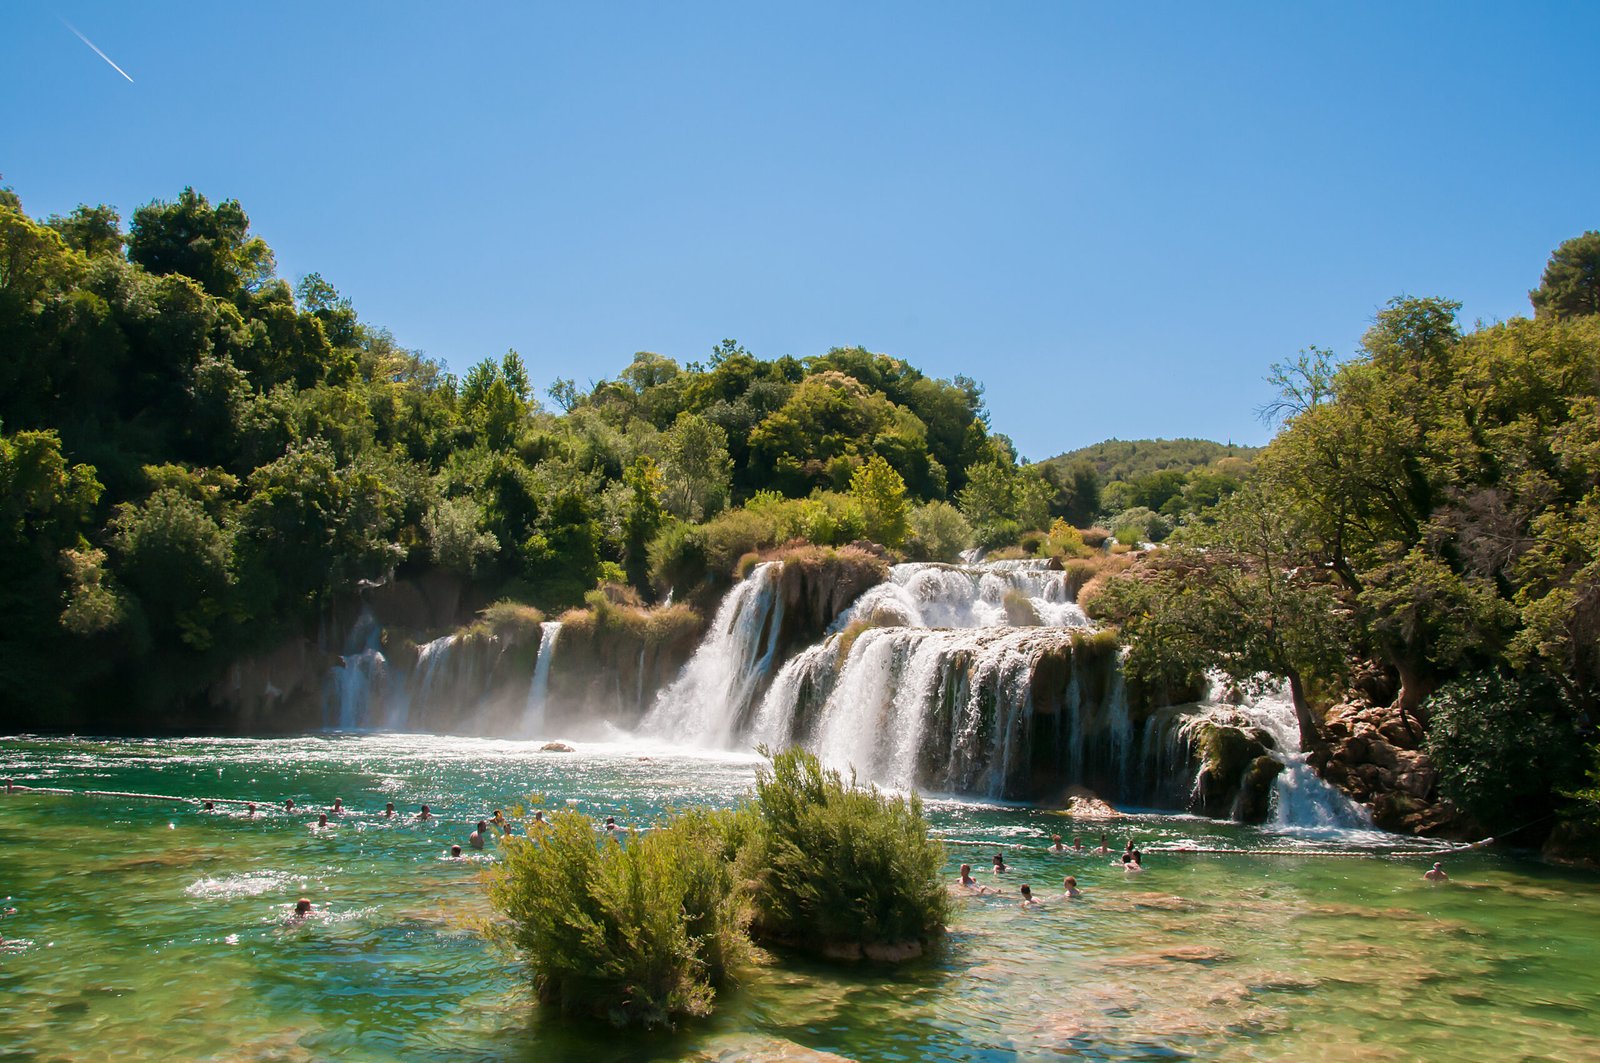 vecteezy_landscape-in-krka-national-park-in-croatia-known-for-its_30333161